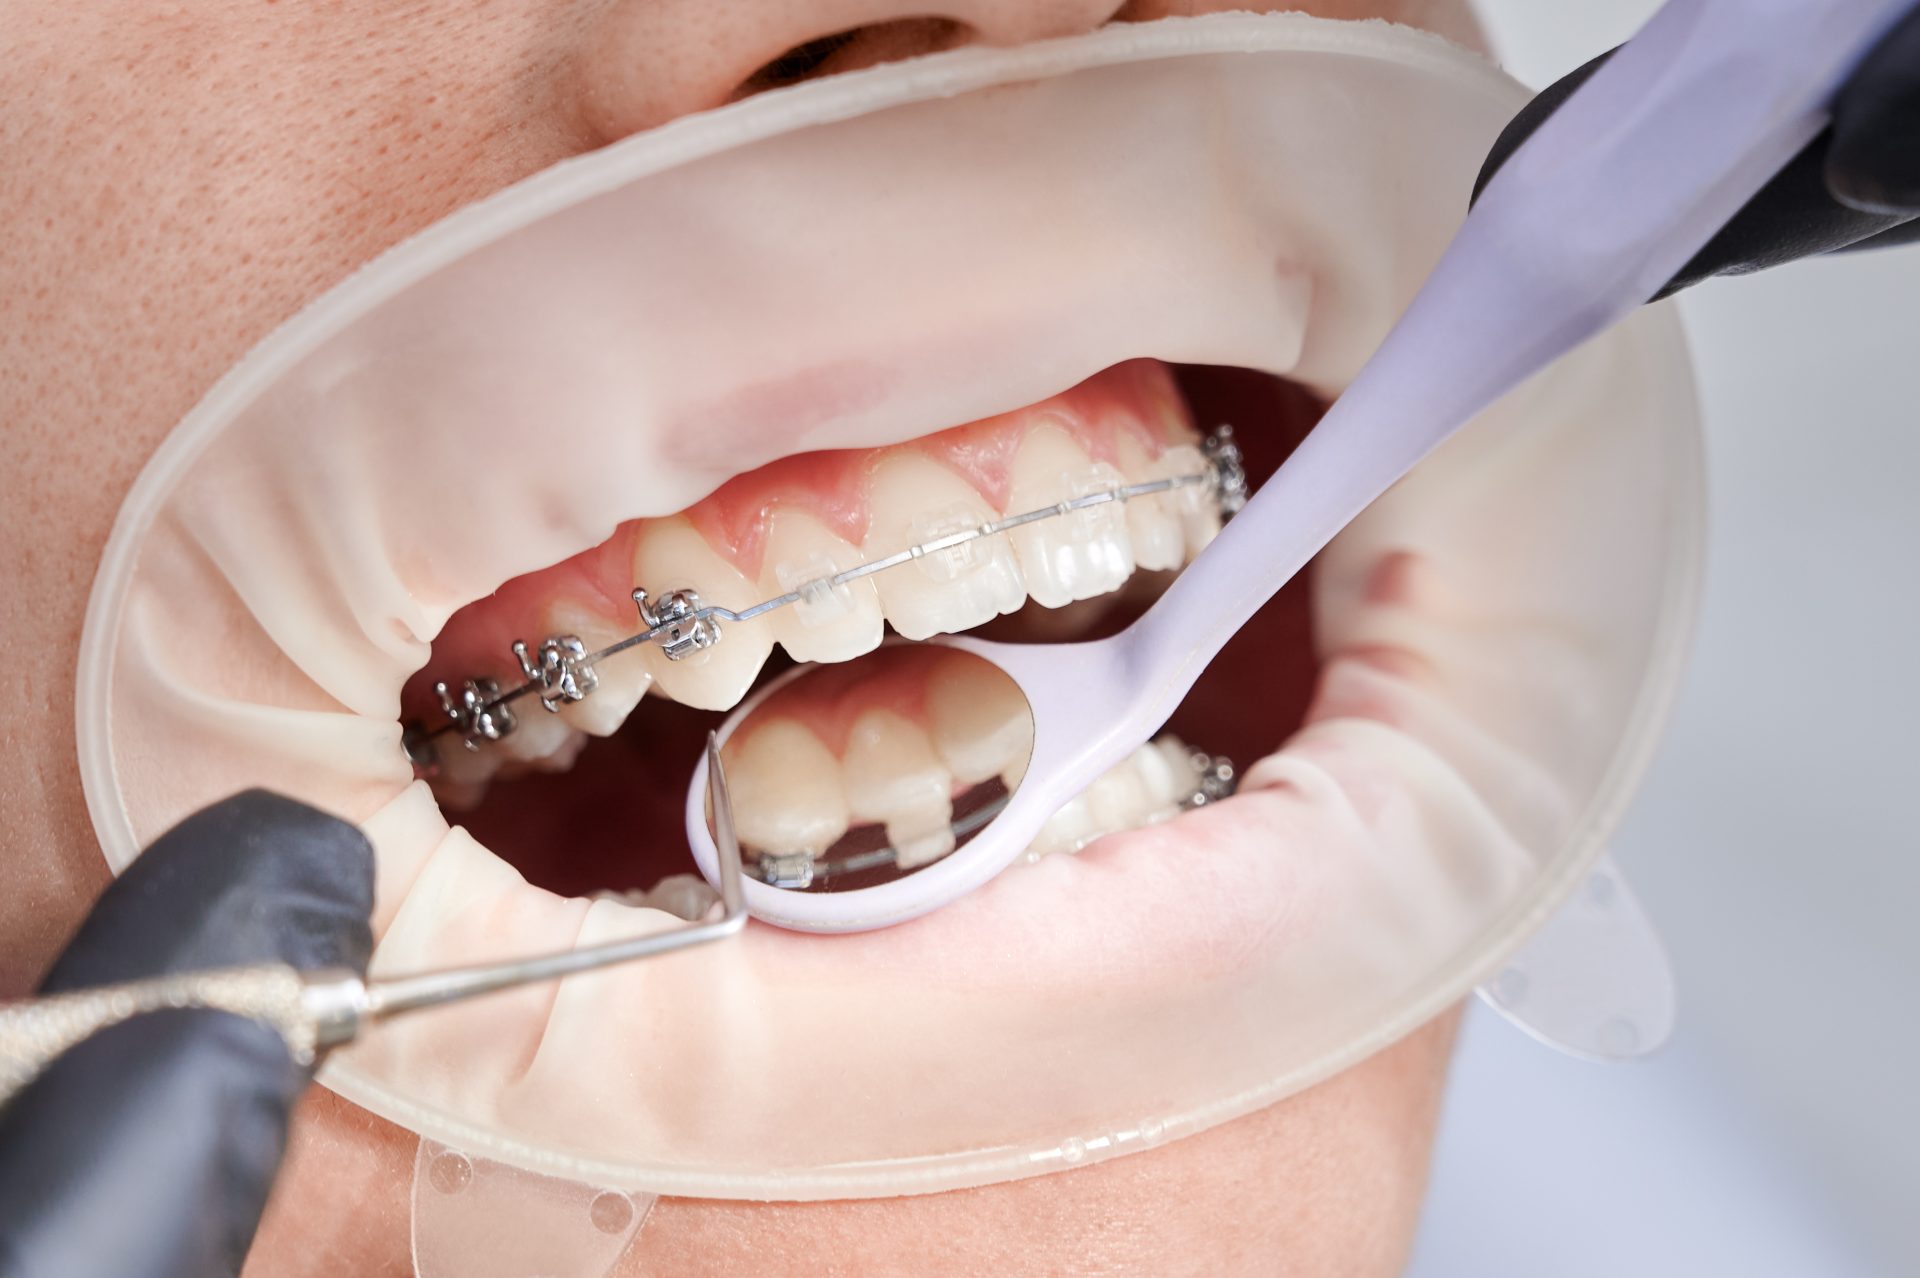 Can You Whiten Your Teeth While Wearing Braces?